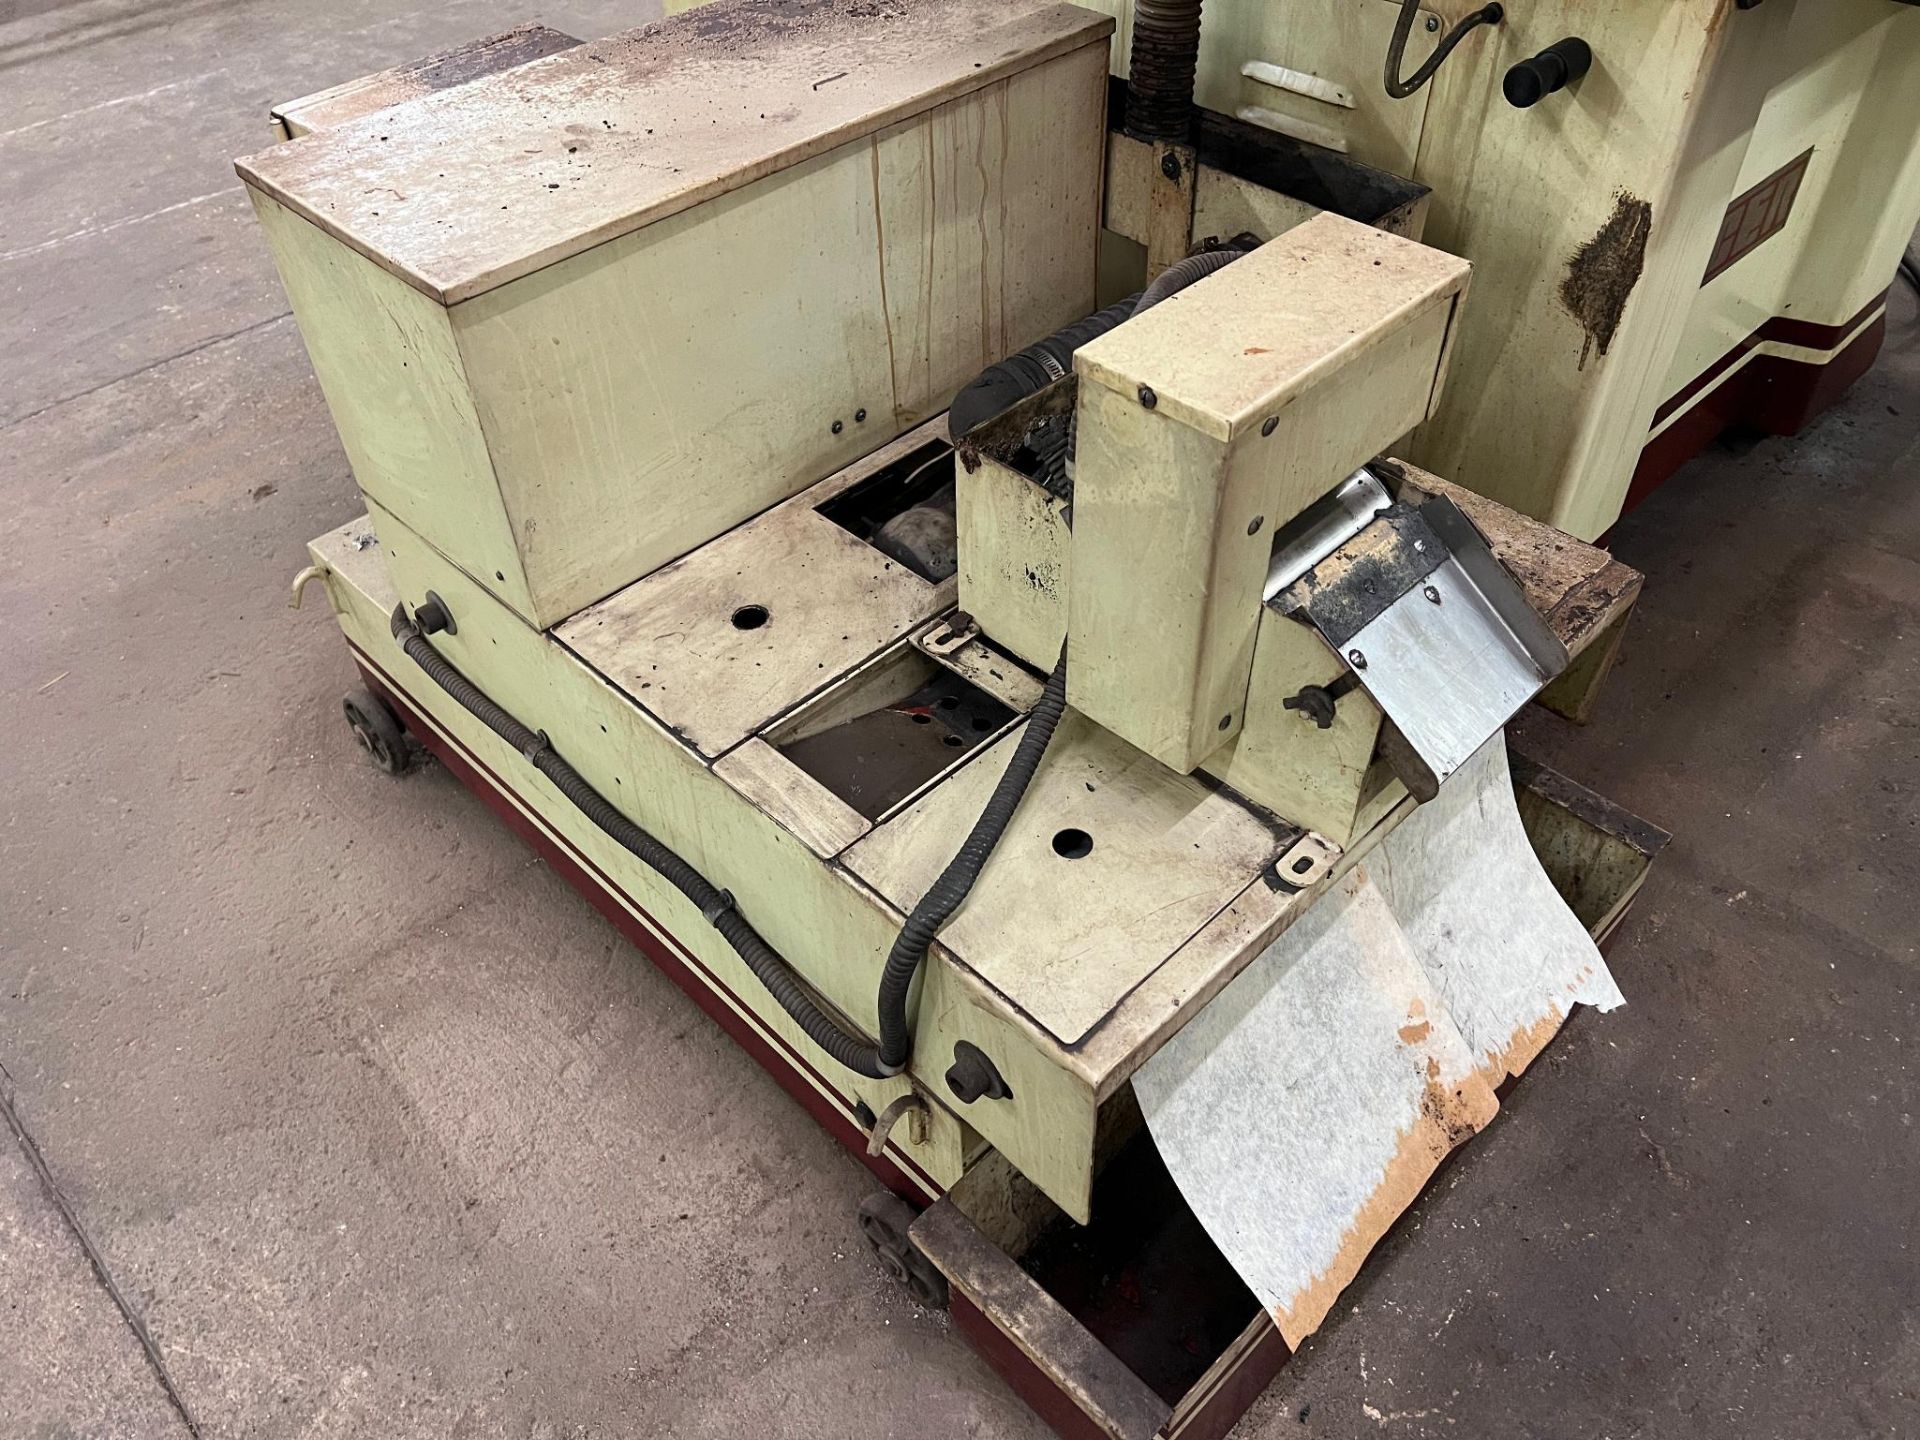 2005 Acer AGS-1224AHD Hydraulic Surface Grinder, Serial Number: s/n N5070188, 3-Axis, Automatic Hydr - Image 8 of 26